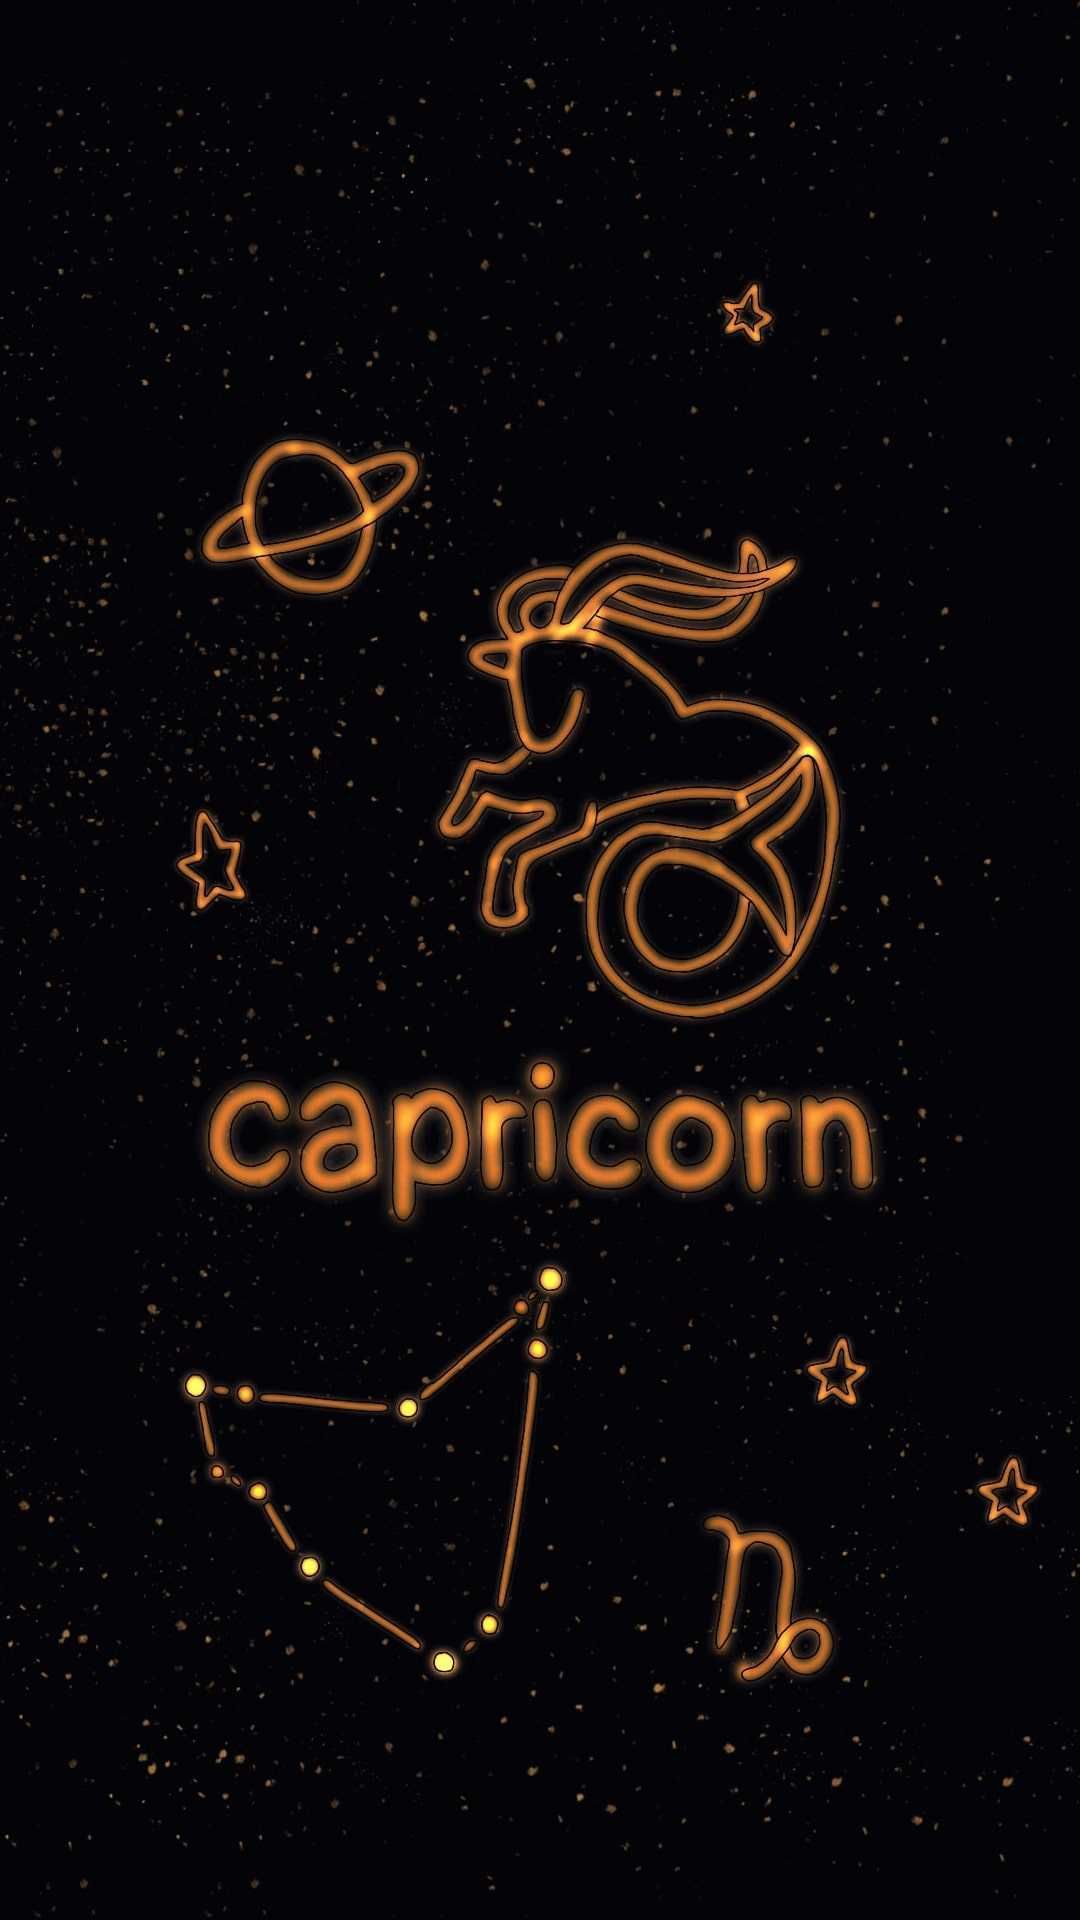 IPhone wallpaper of Capricorn the goat, with a gold and black background - Capricorn